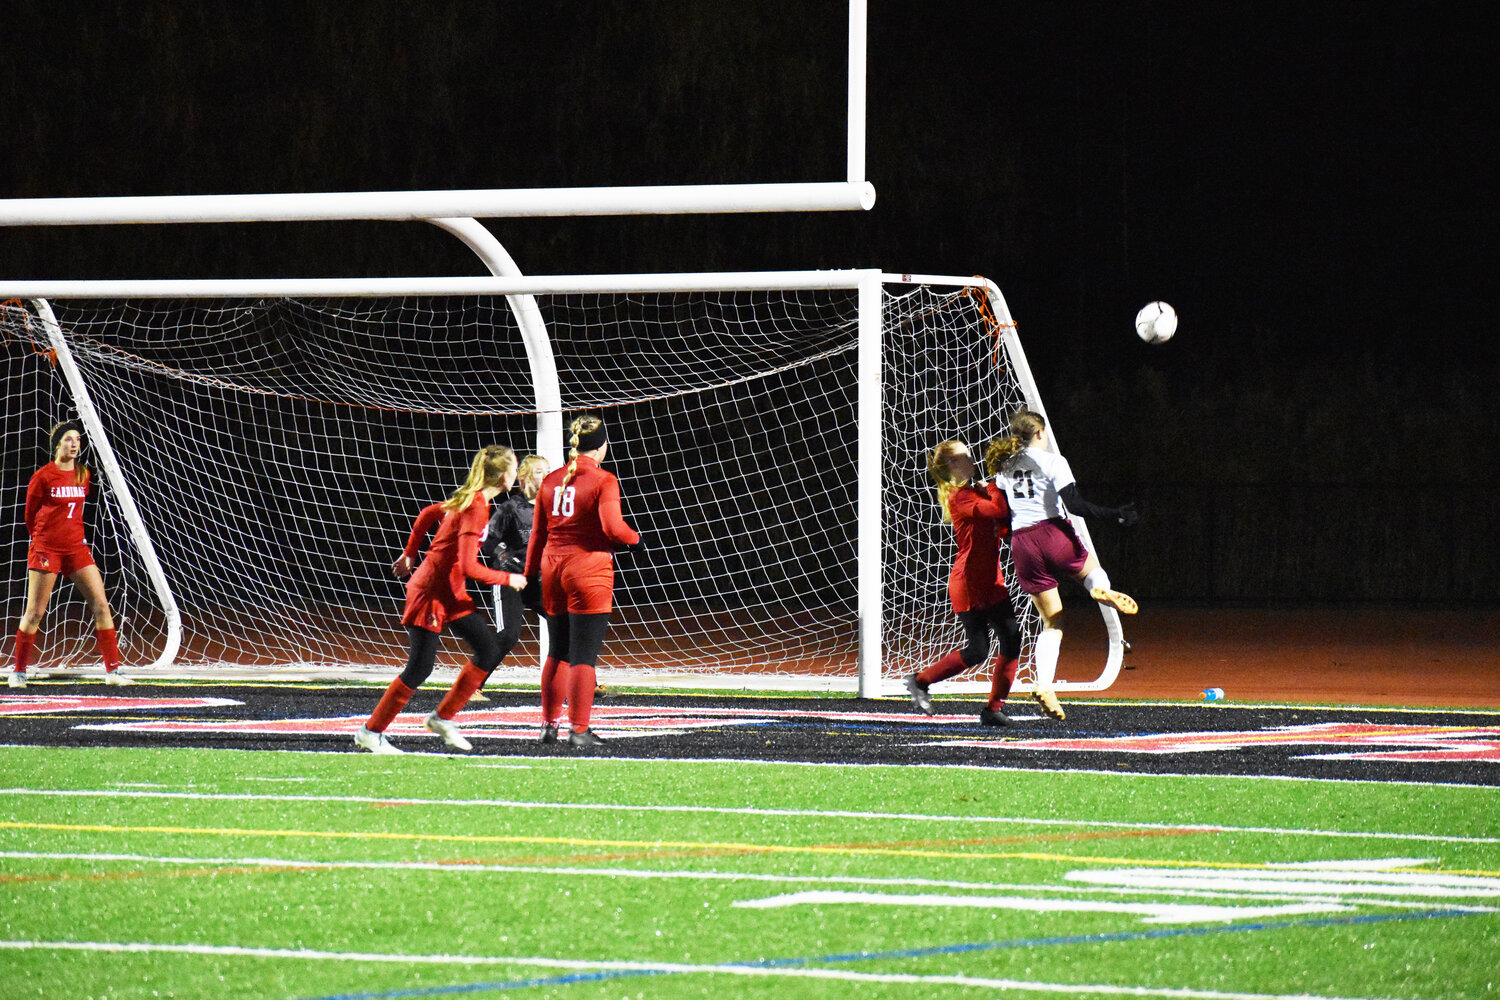 Allison Froehlich attempts to redirect a Livingston Manor corner kick towards the goal.